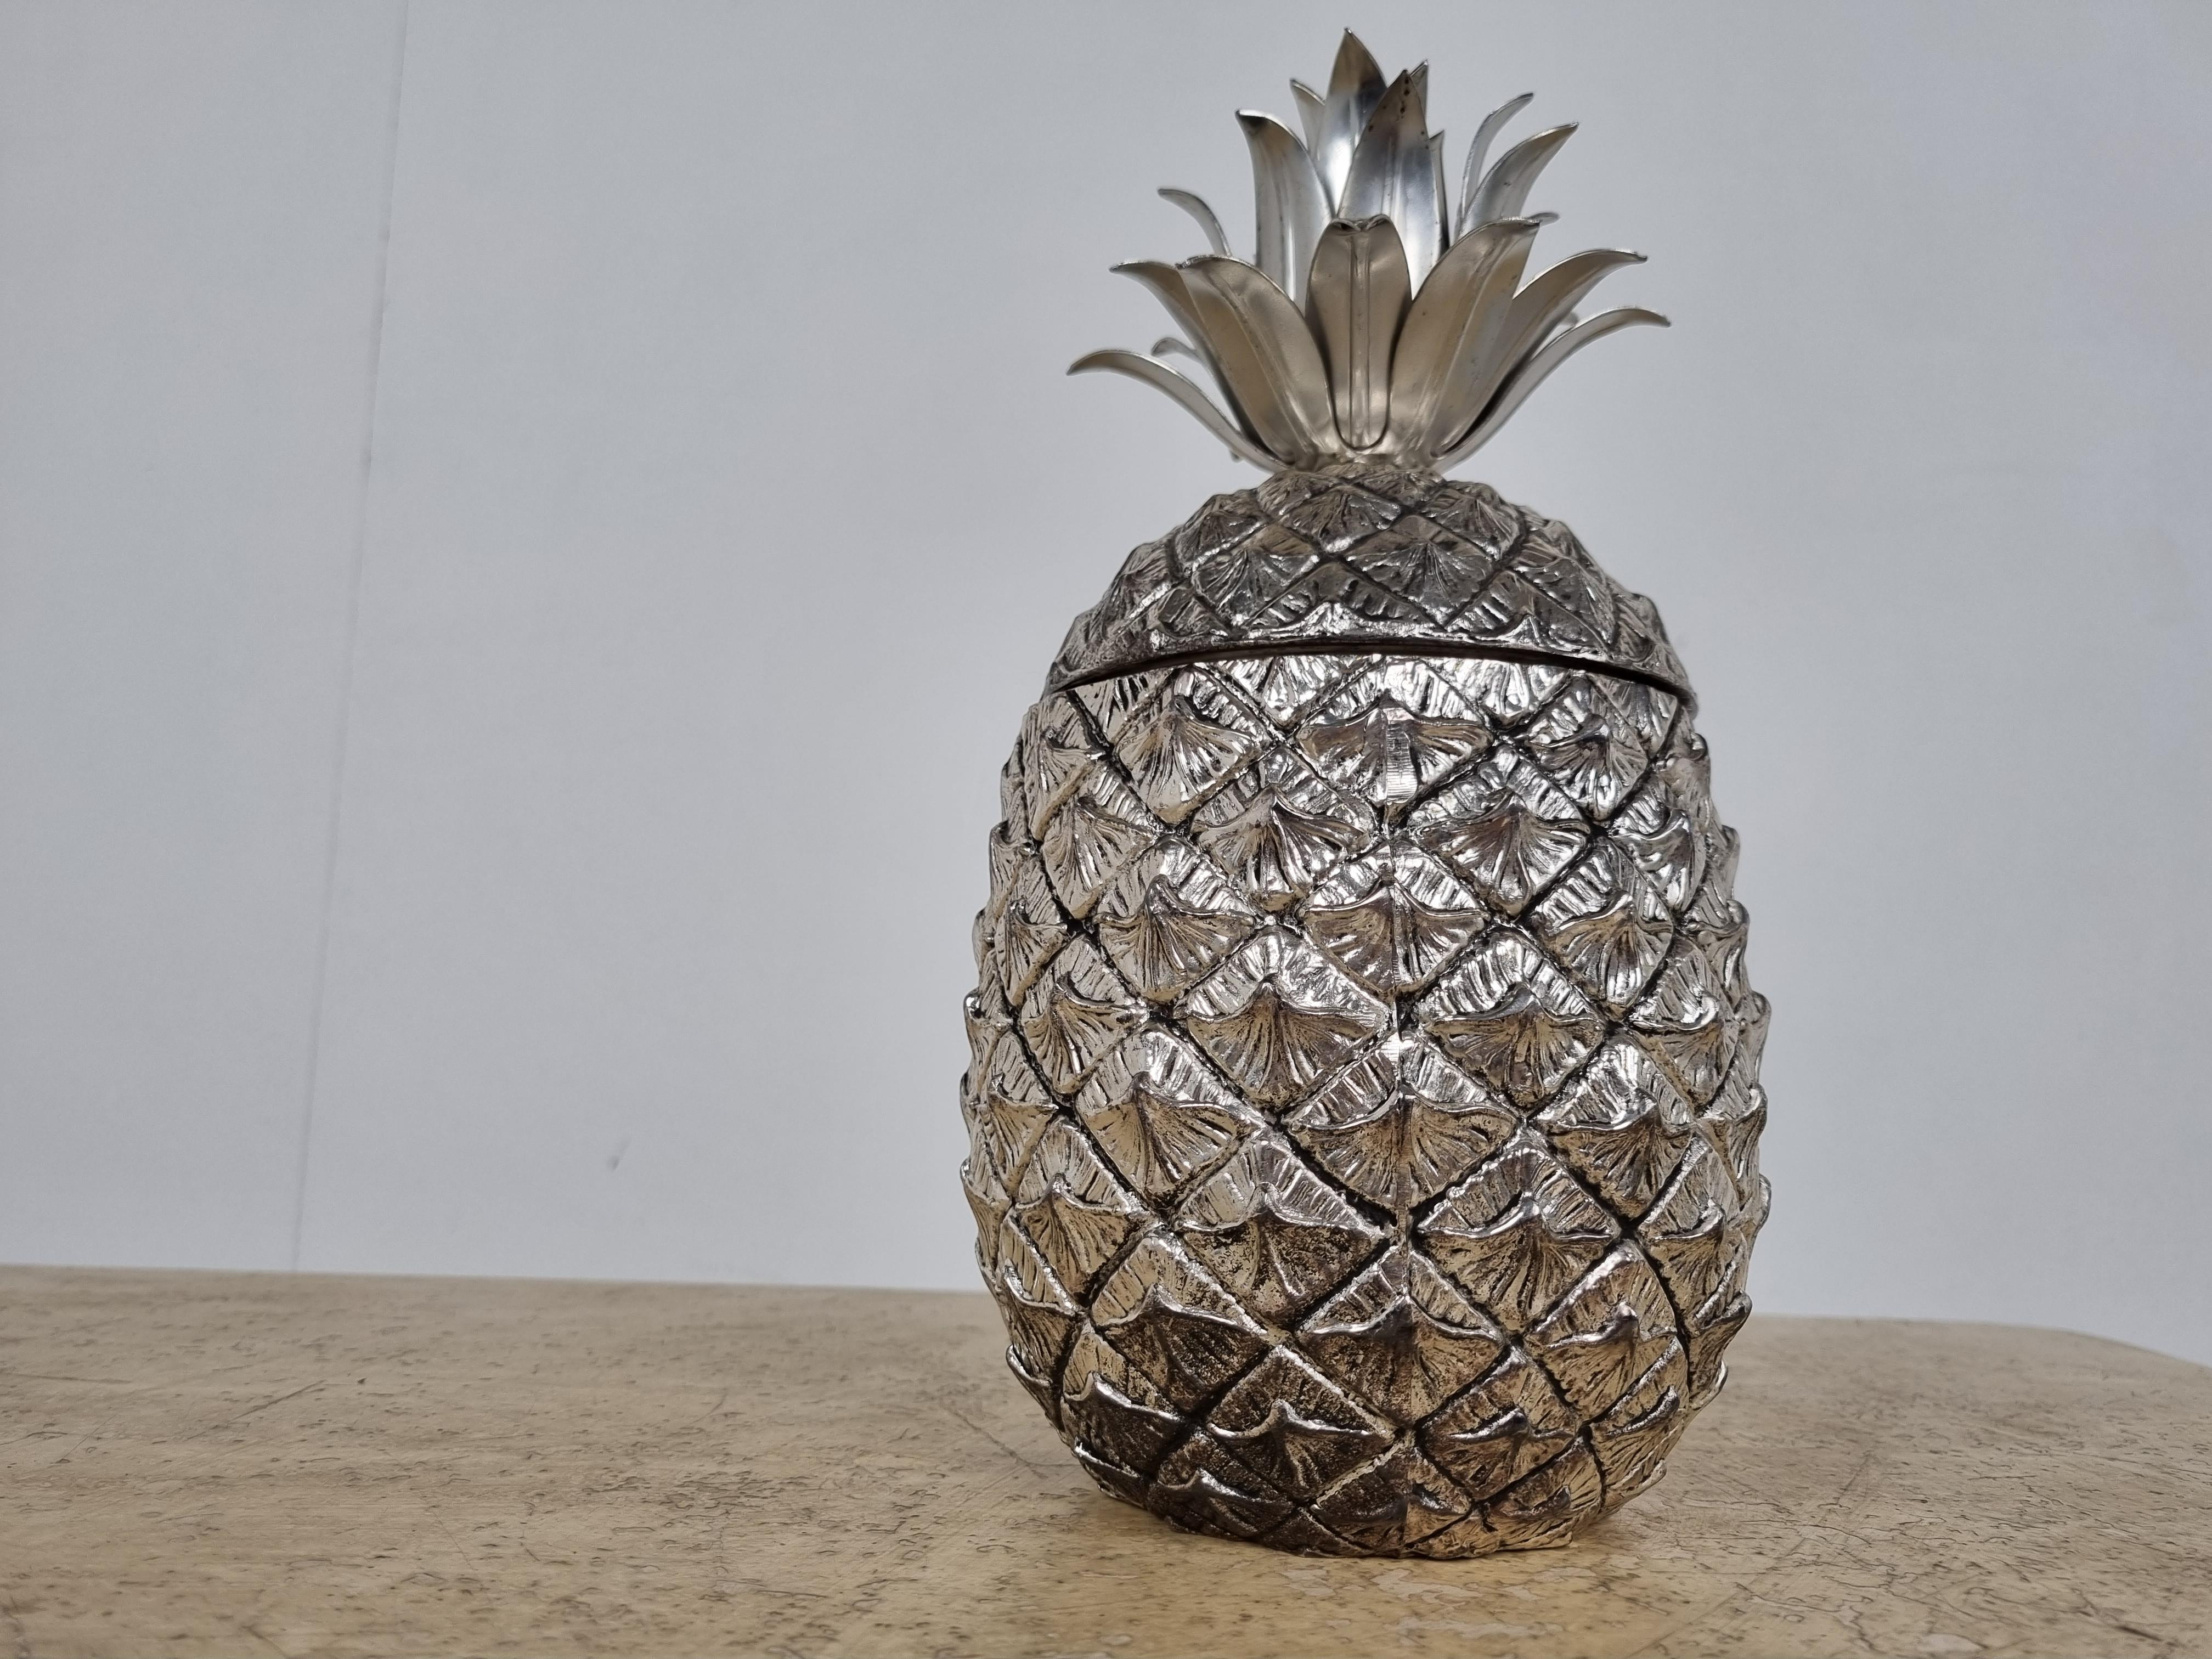 Hollywood Regency Vintage Pineapple Ice Bucket by Mauro Manetti 1960s